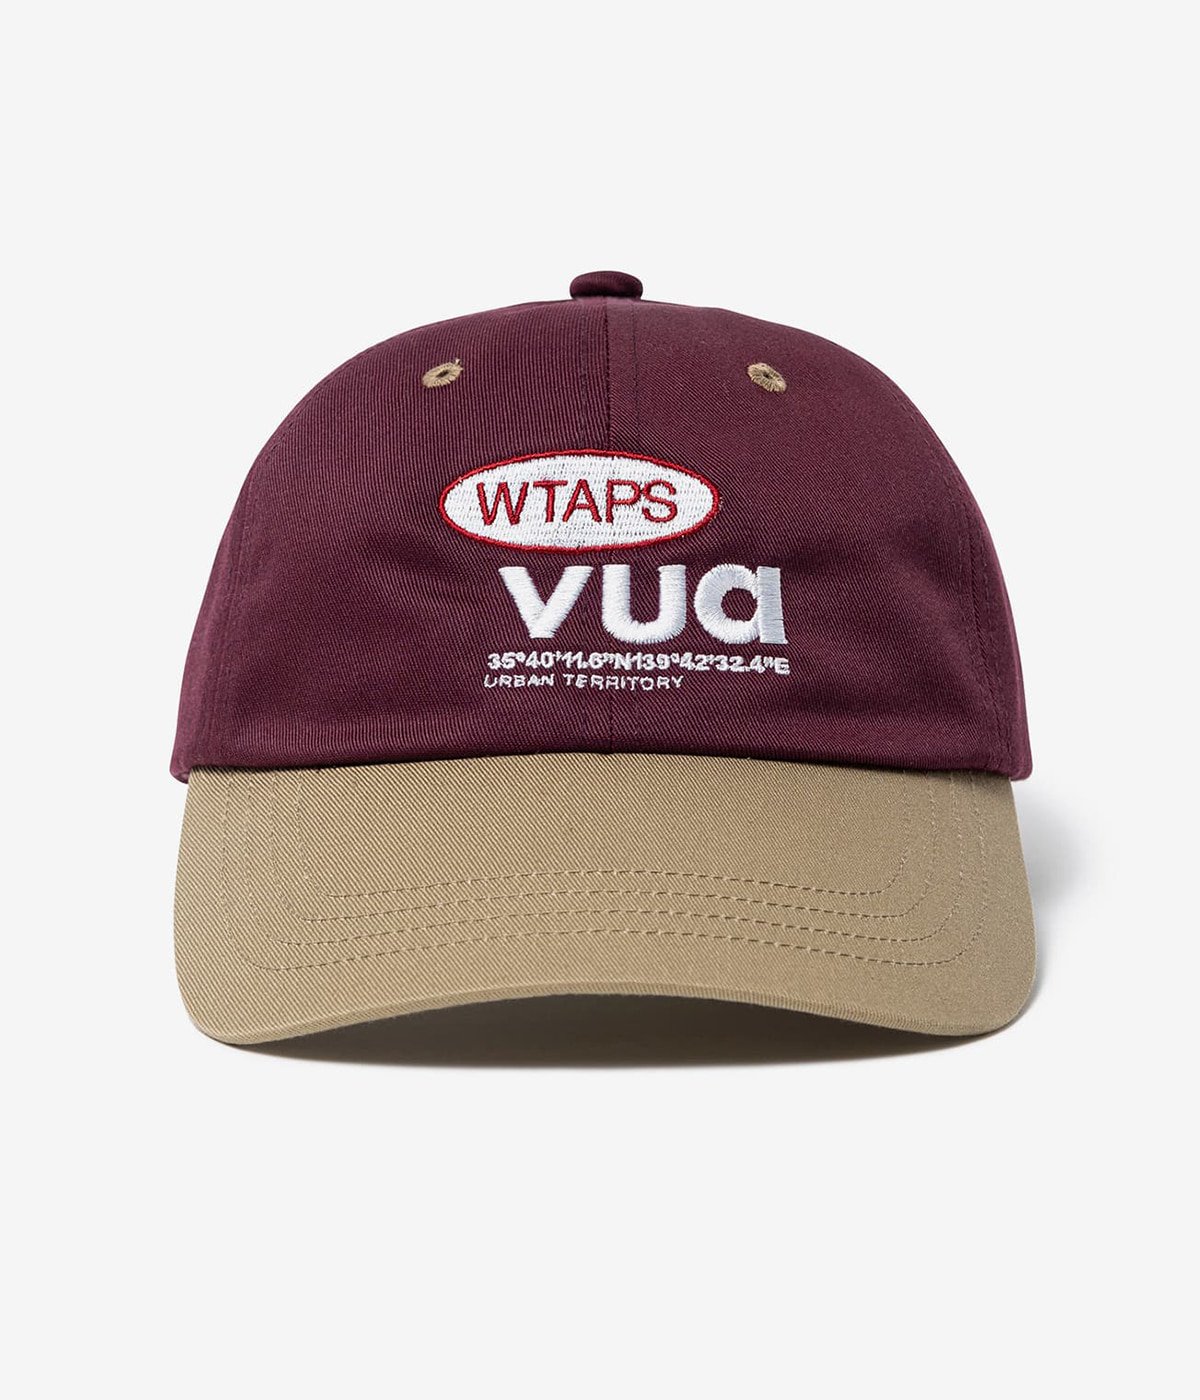 WTAPS T-6M 01 CAP POLY TWILL PROTECT-